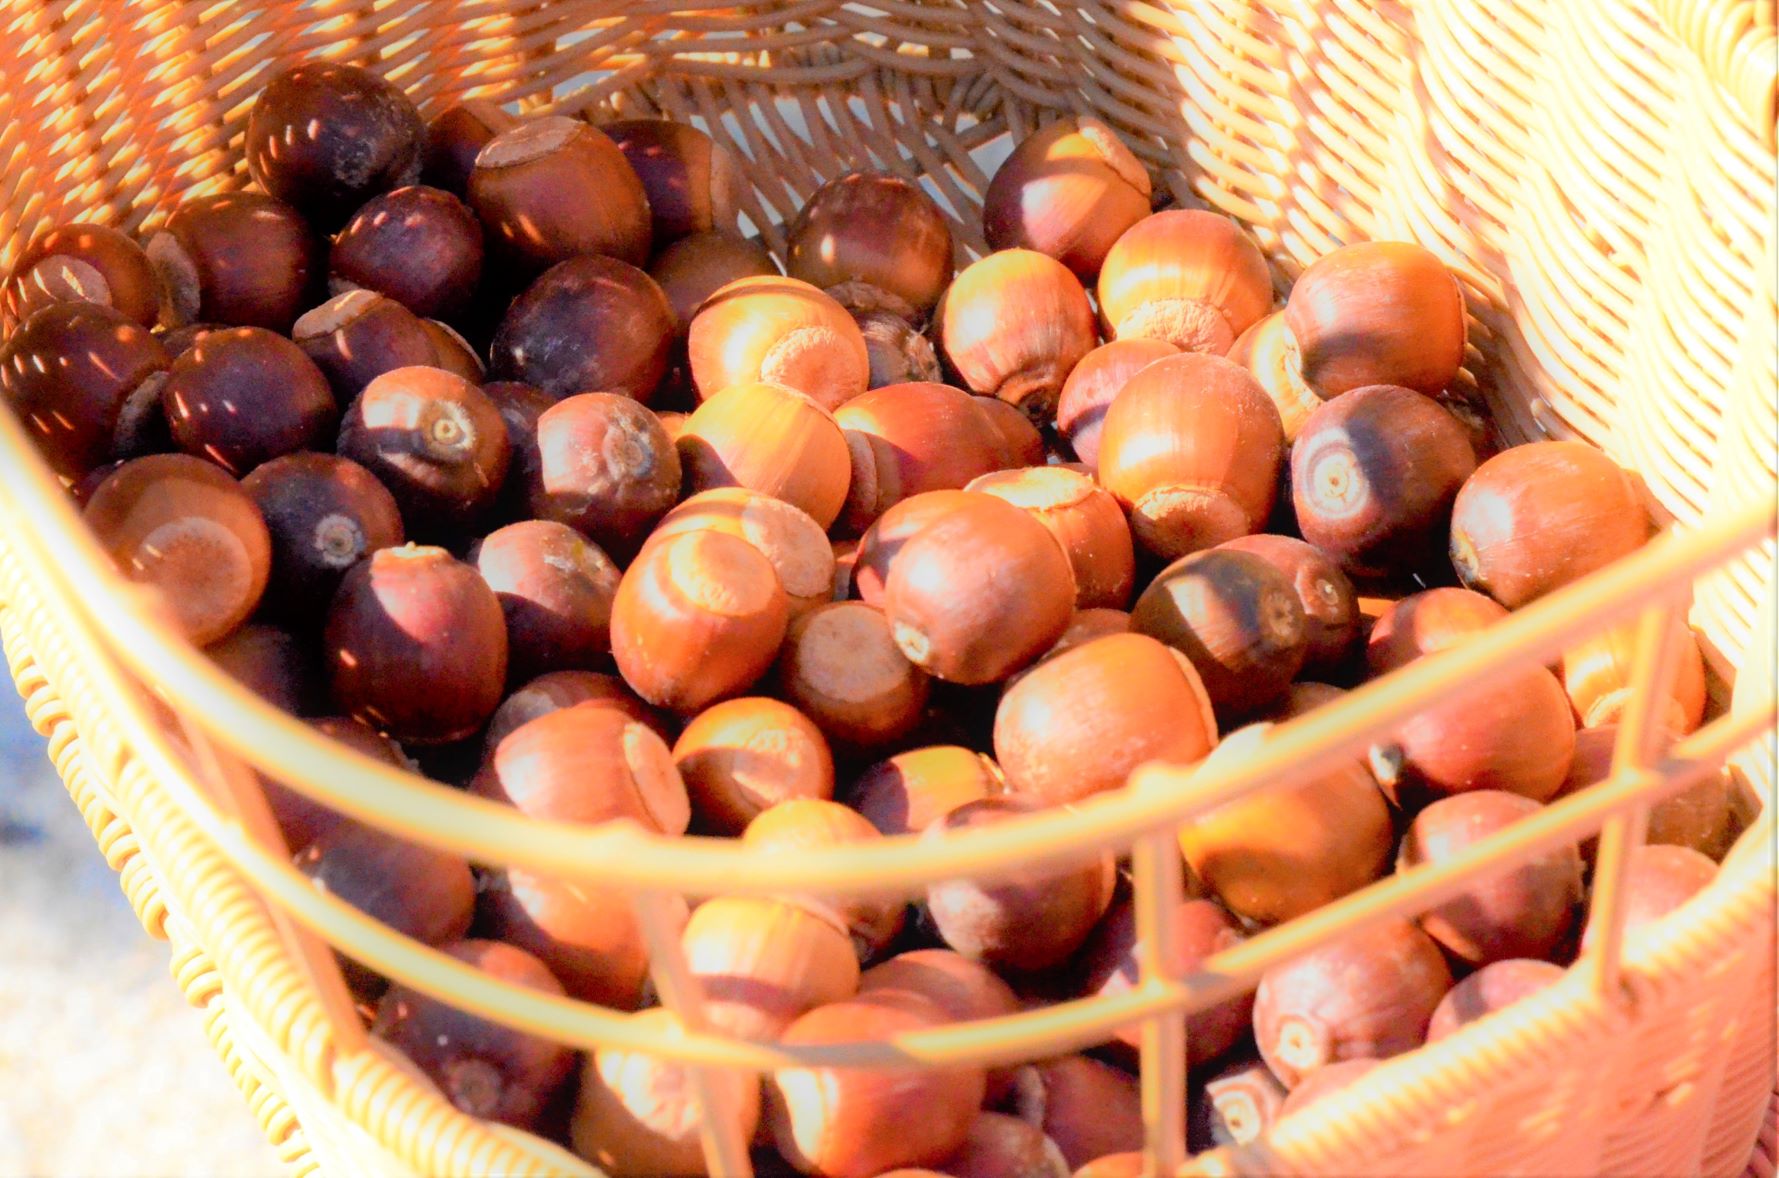 We picked up a lot of acorns in my bicycle basket